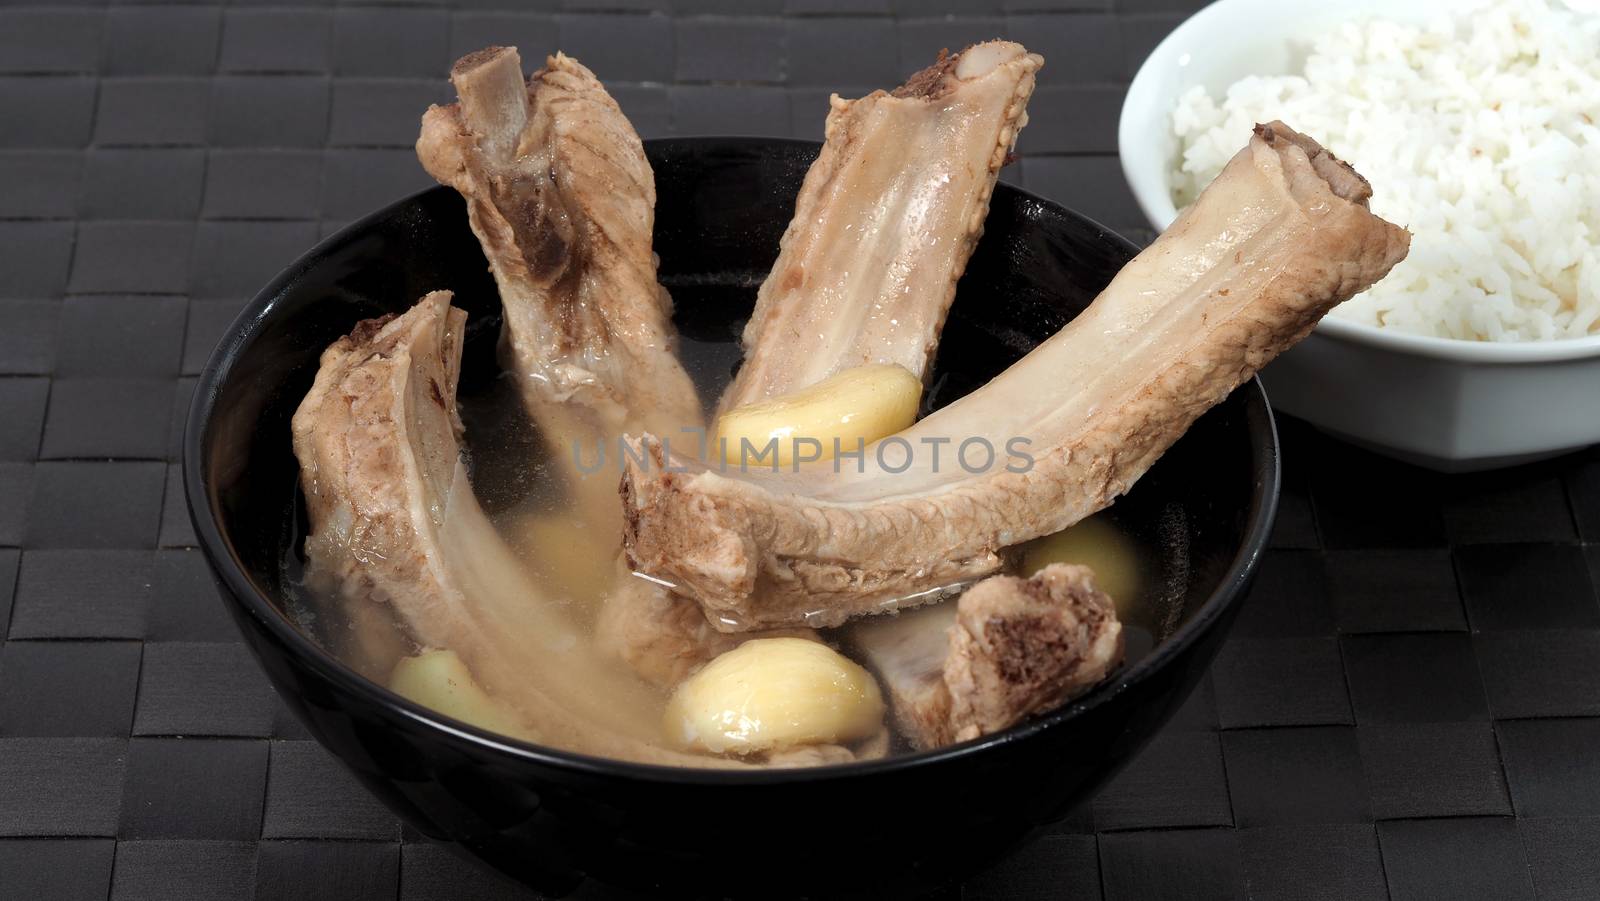 Bak kut teh or pork ribs soup which made from many ingredients such as big garlic, white pepper and many spices. Very popular traditional authentic menu dish in Singapore and Malaysia. Served hot with rice bowl